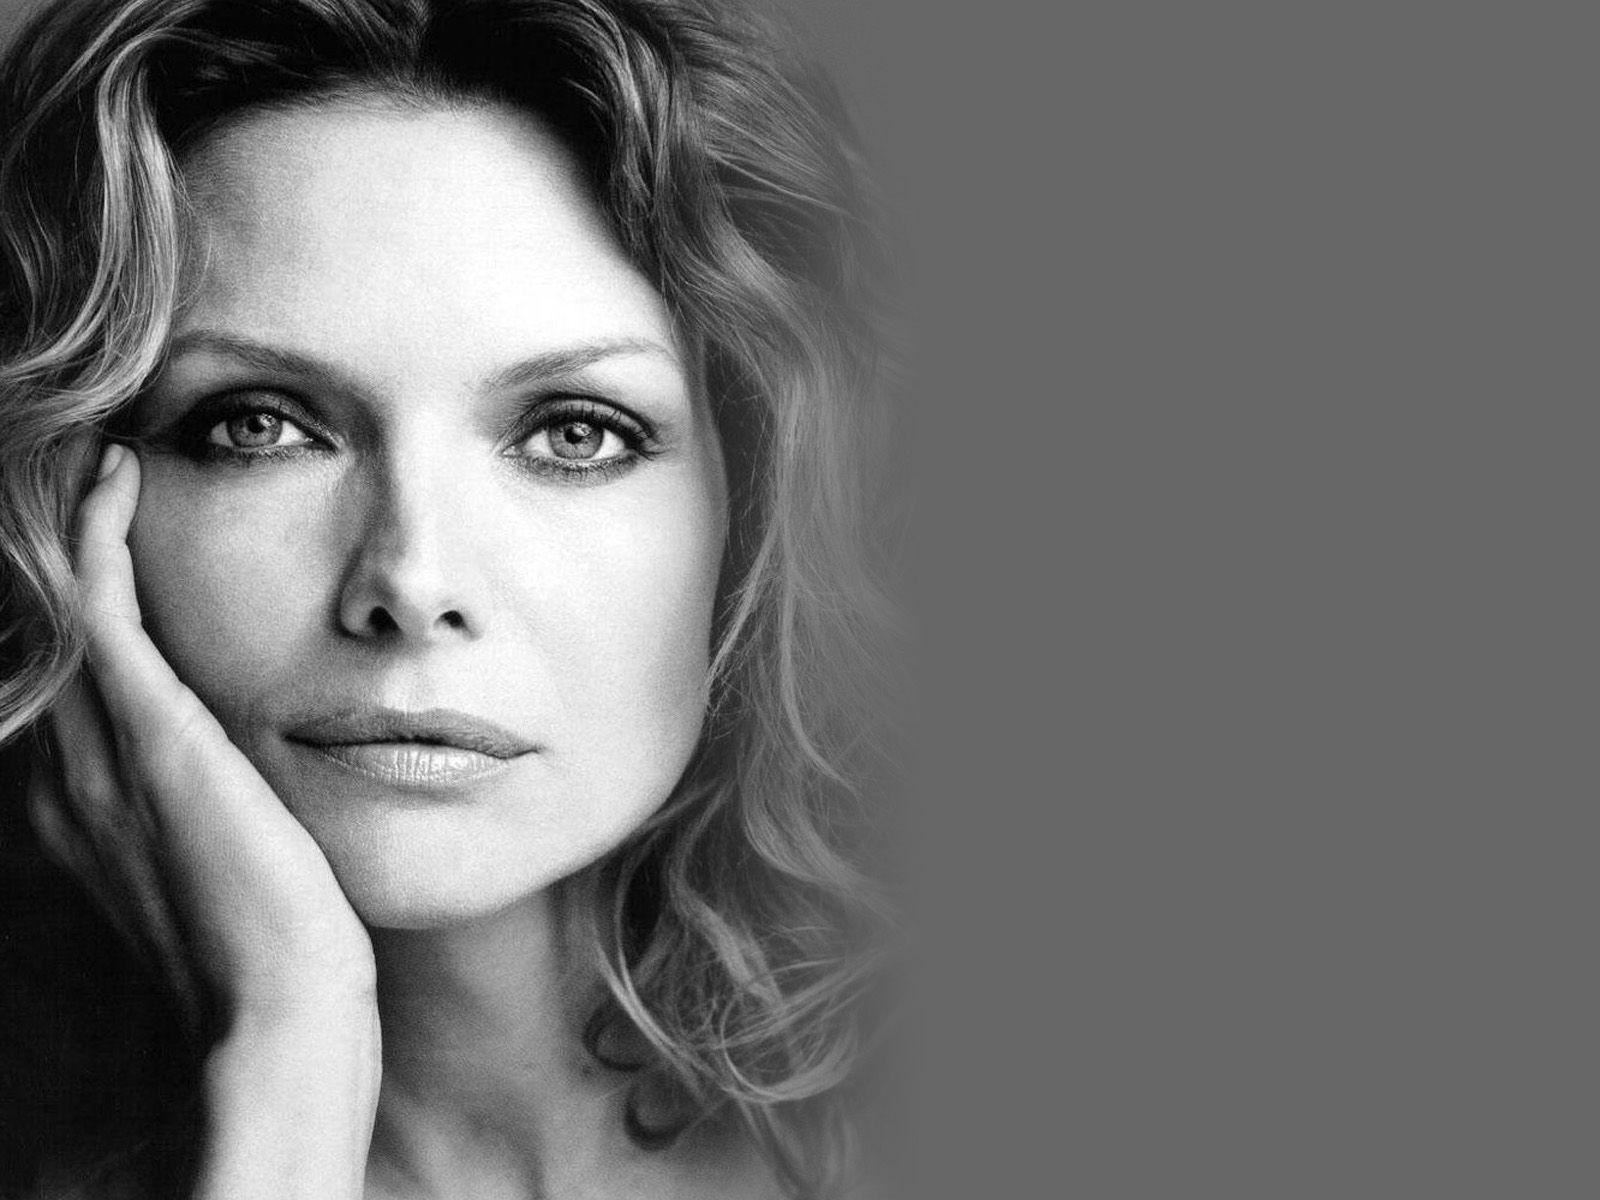 Michelle Pfeiffer Wallpapers Wallpaper Cave